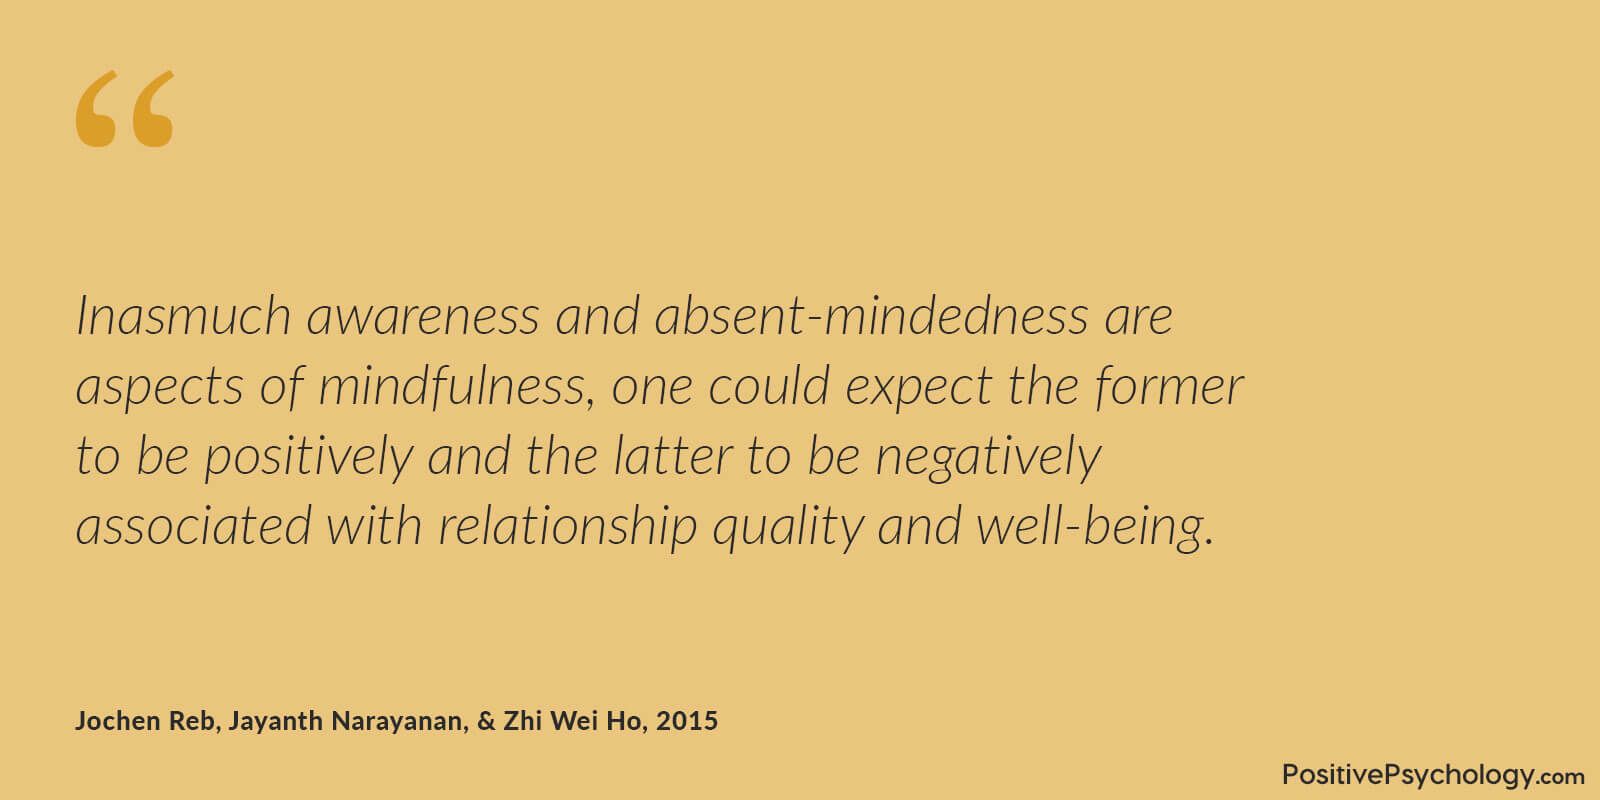 Absent-mindedness is an aspect of mindfulness